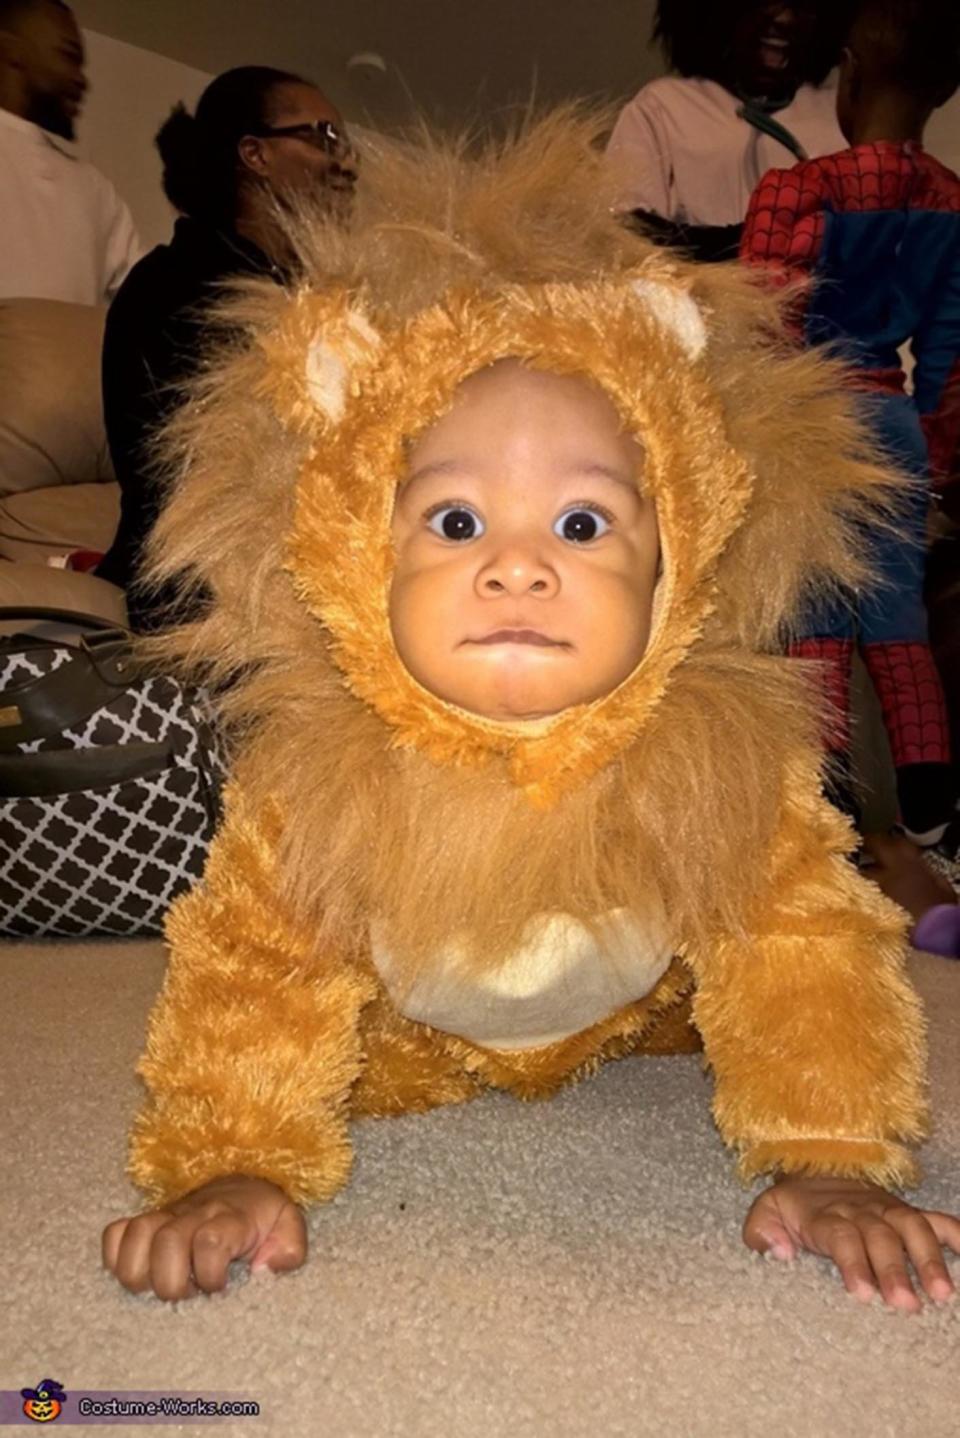 Via <a href="http://www.costume-works.com/costumes_for_babies/little-lion2.html" target="_blank">Costume Works</a>